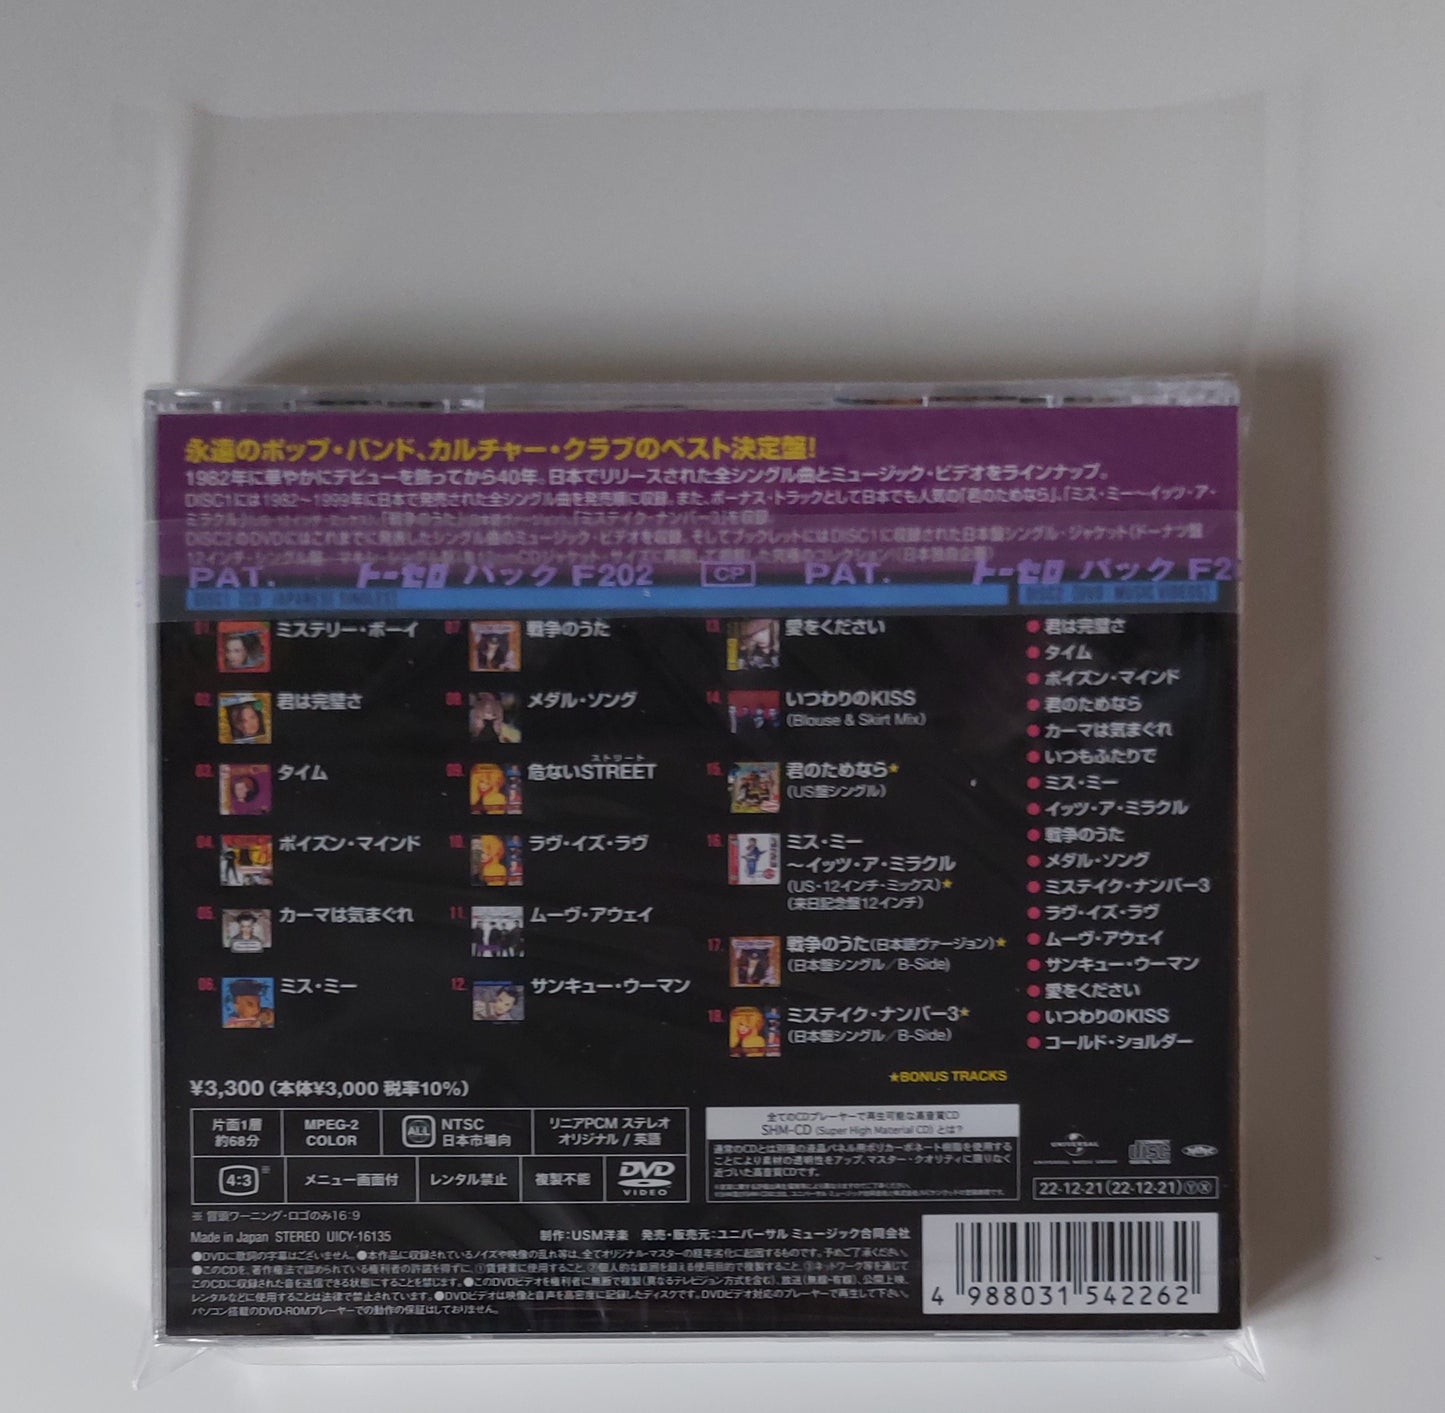 10 CD Jewel Case Resealable Japanese Sleeves